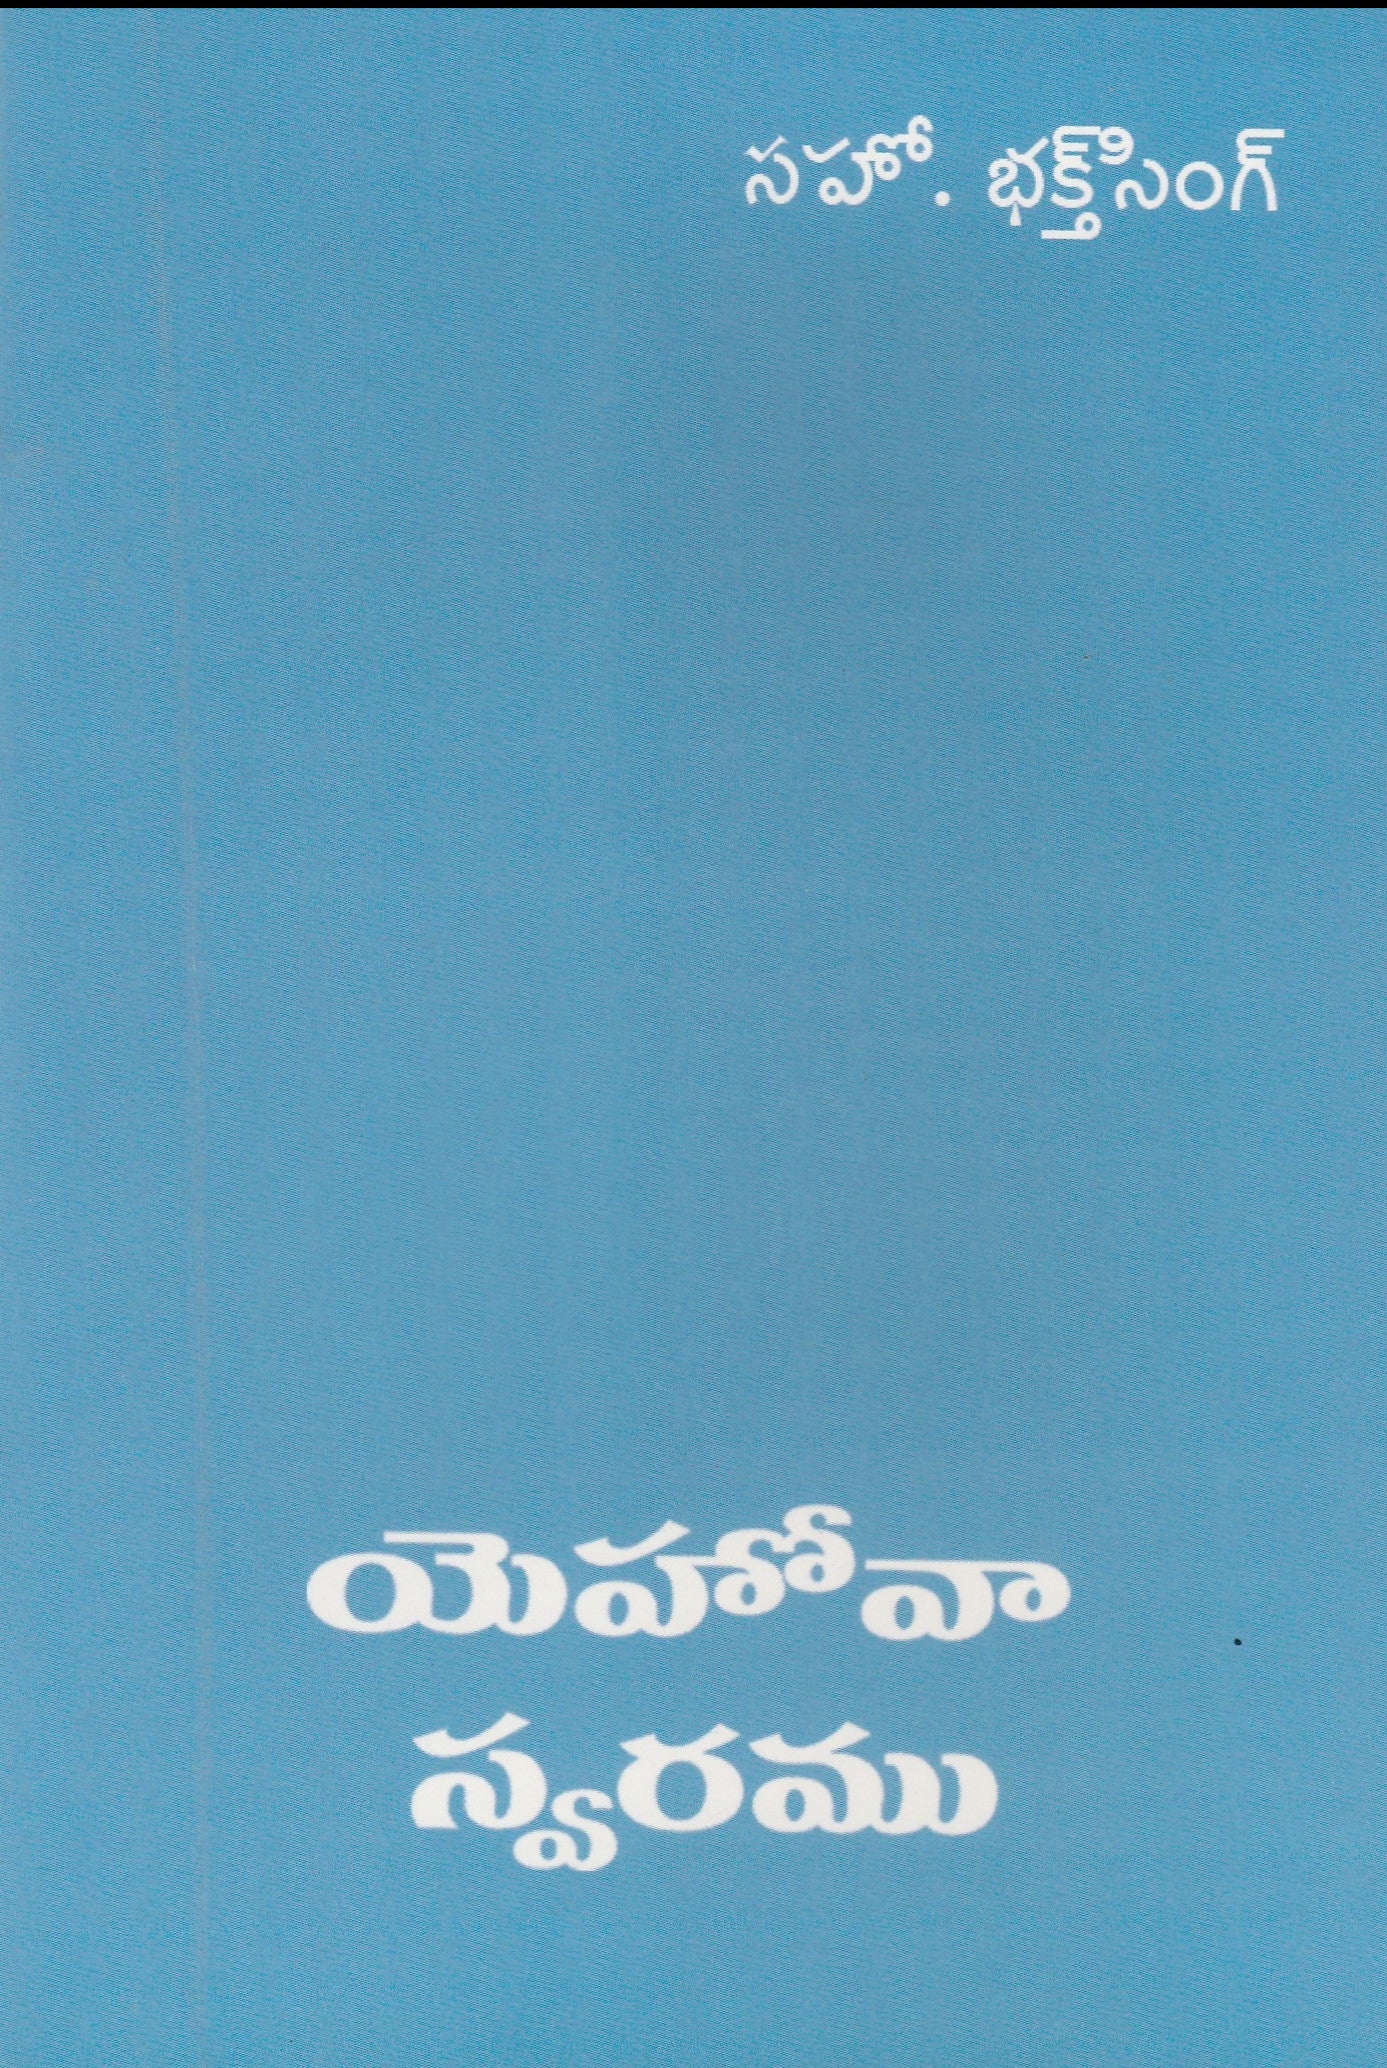 Voice of the Lord by Bakht Singh in Telugu | Telugu Bakht Singh Books | Telugu Christian Books